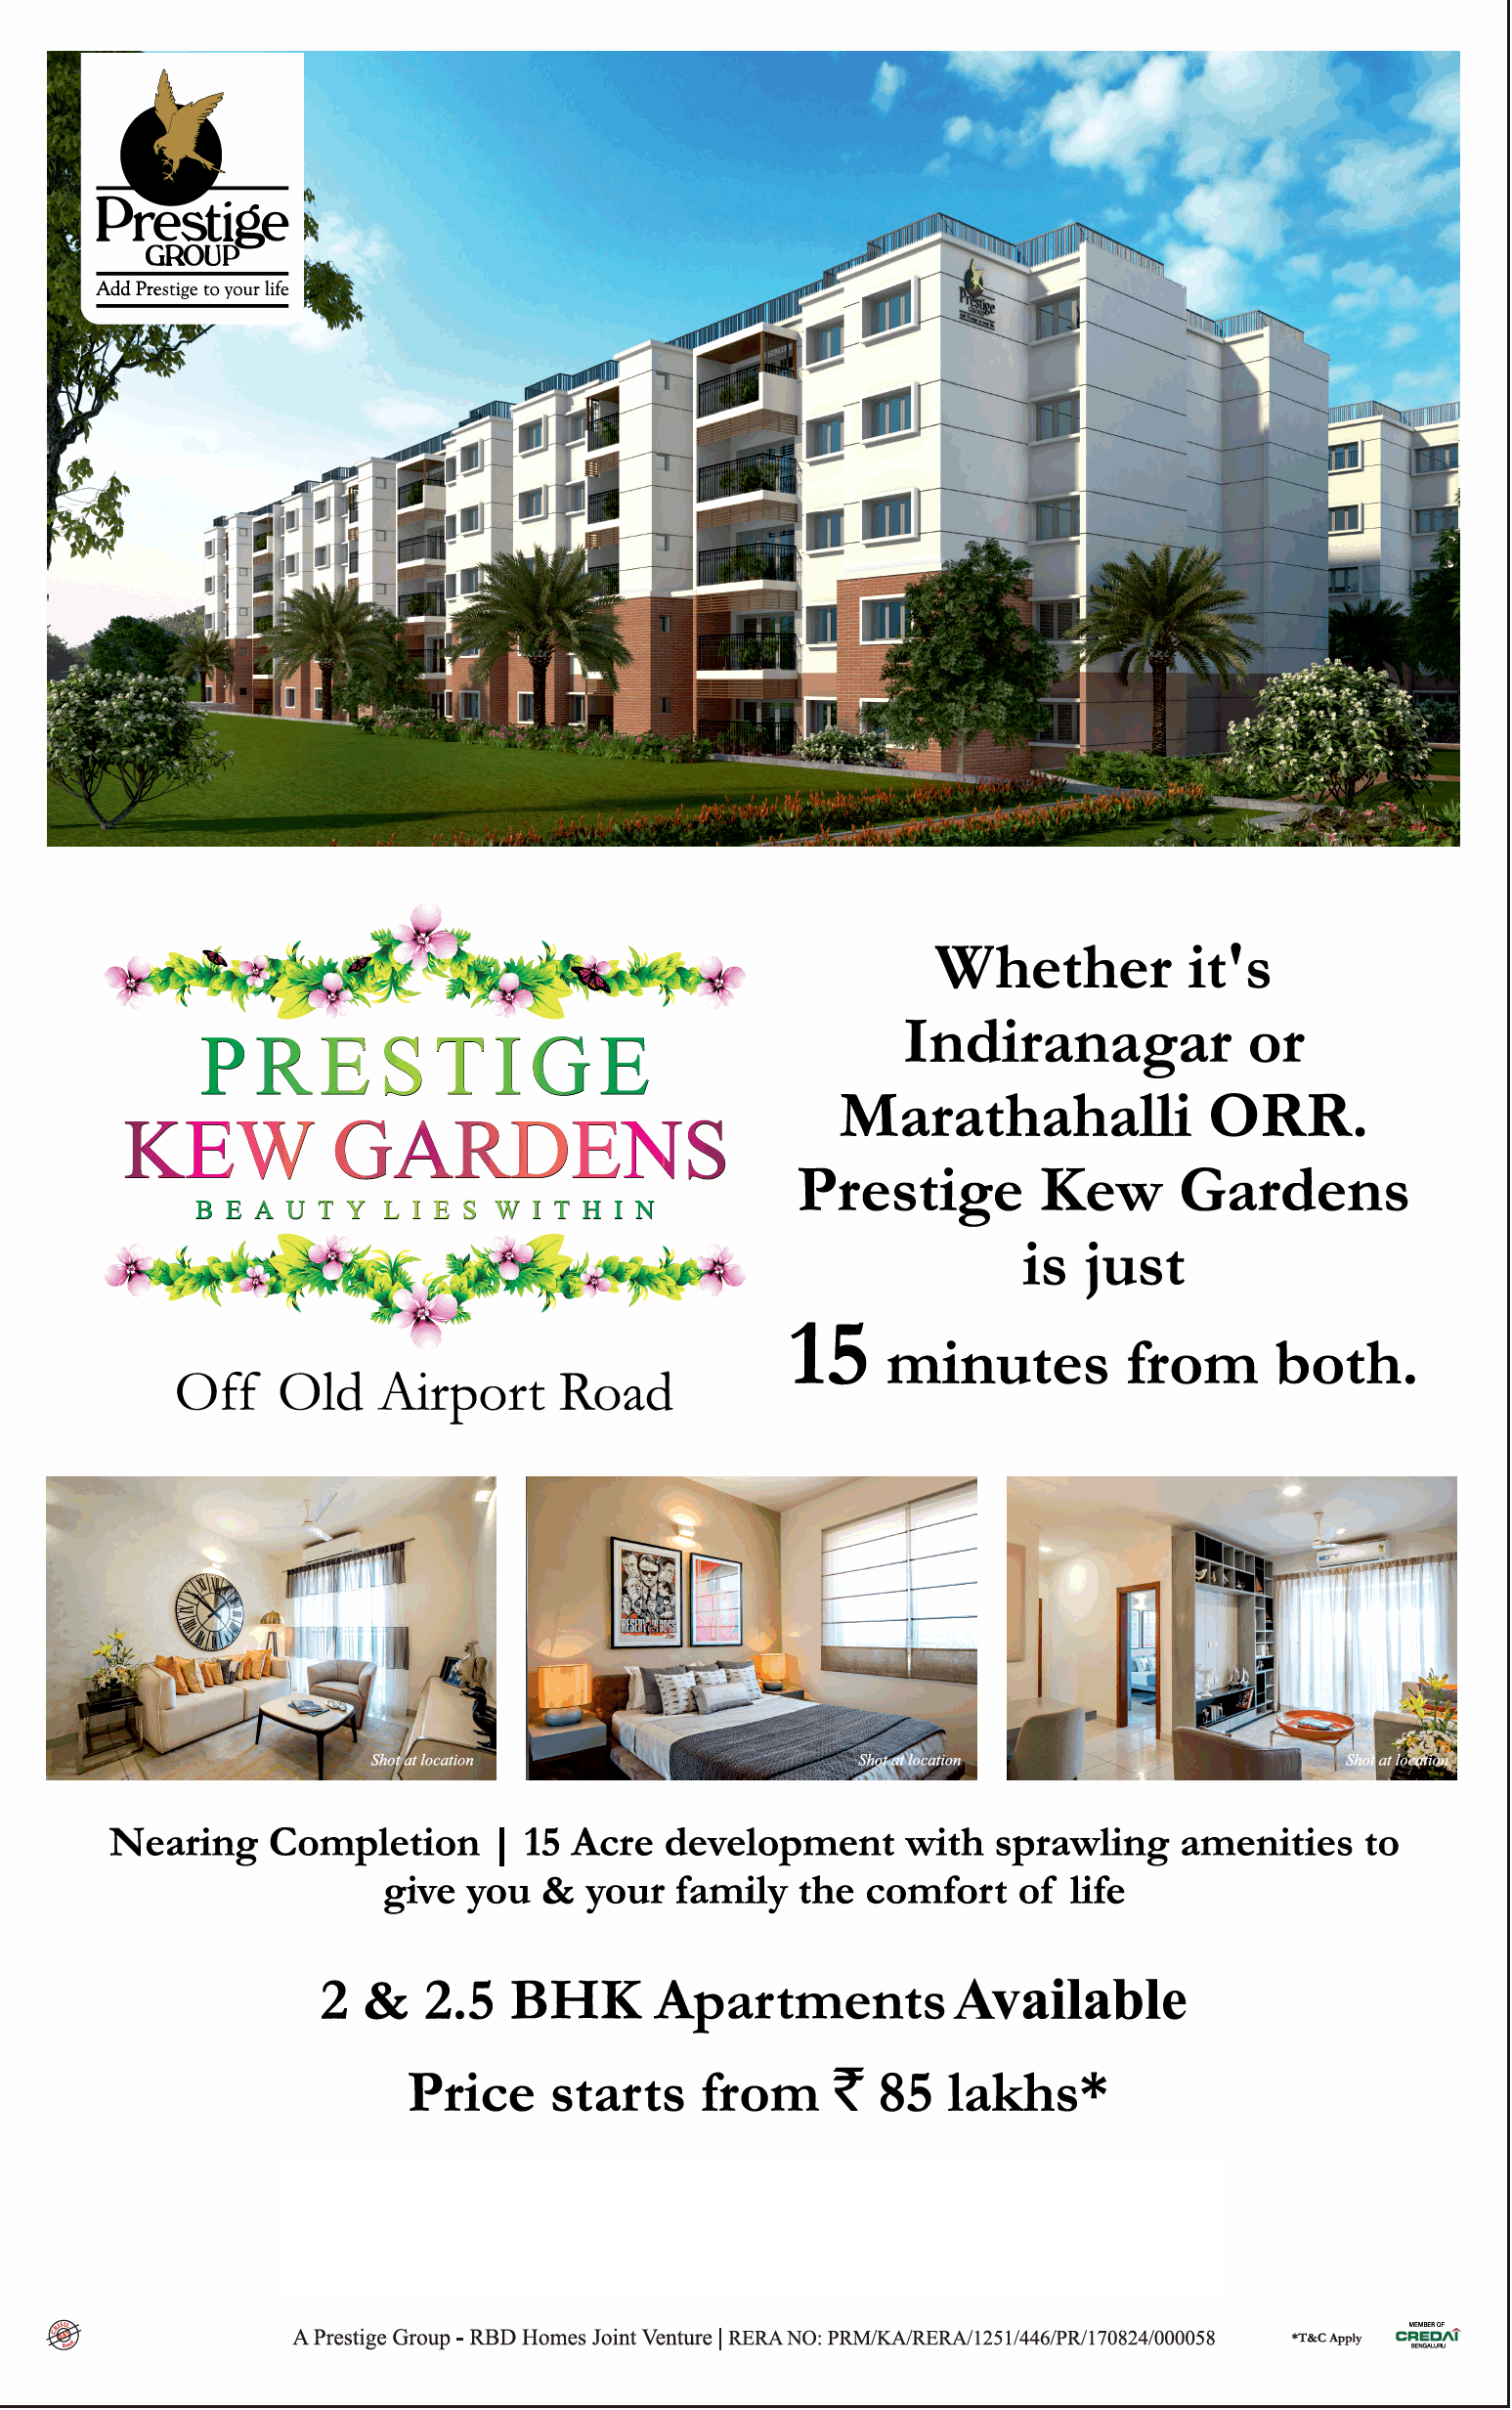 Prestige Kew Gardens 2 & 2.5 BHK Apartments Available Price starts from Rs 85 lakhs in Bangalore Update